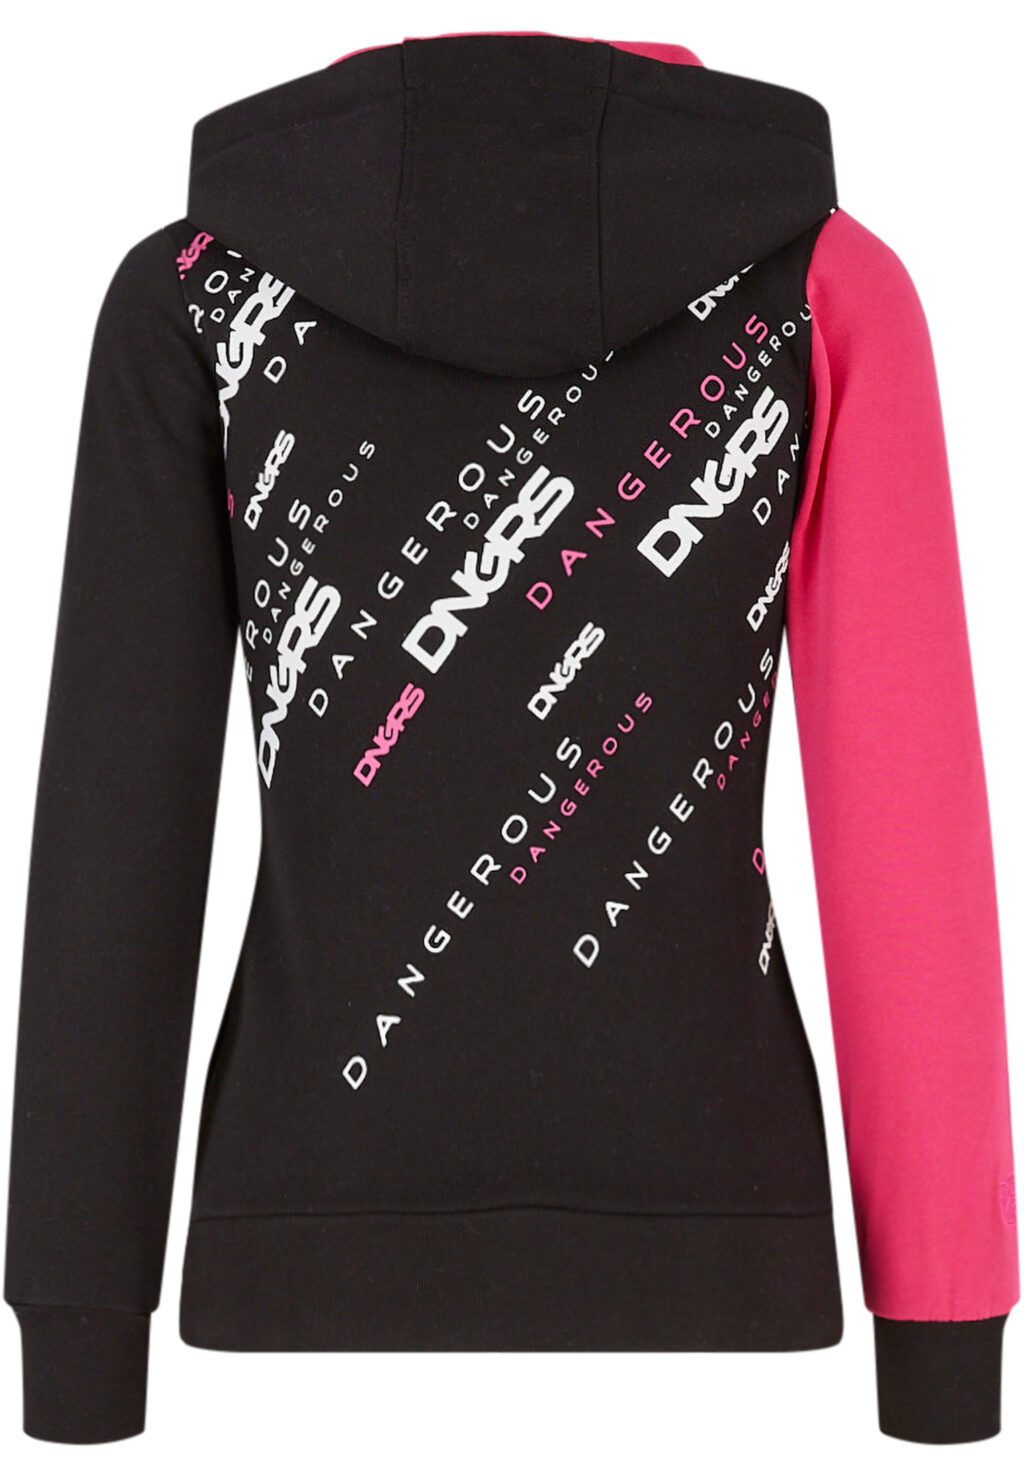 Down to Earth Hoody black/pink DLHD076